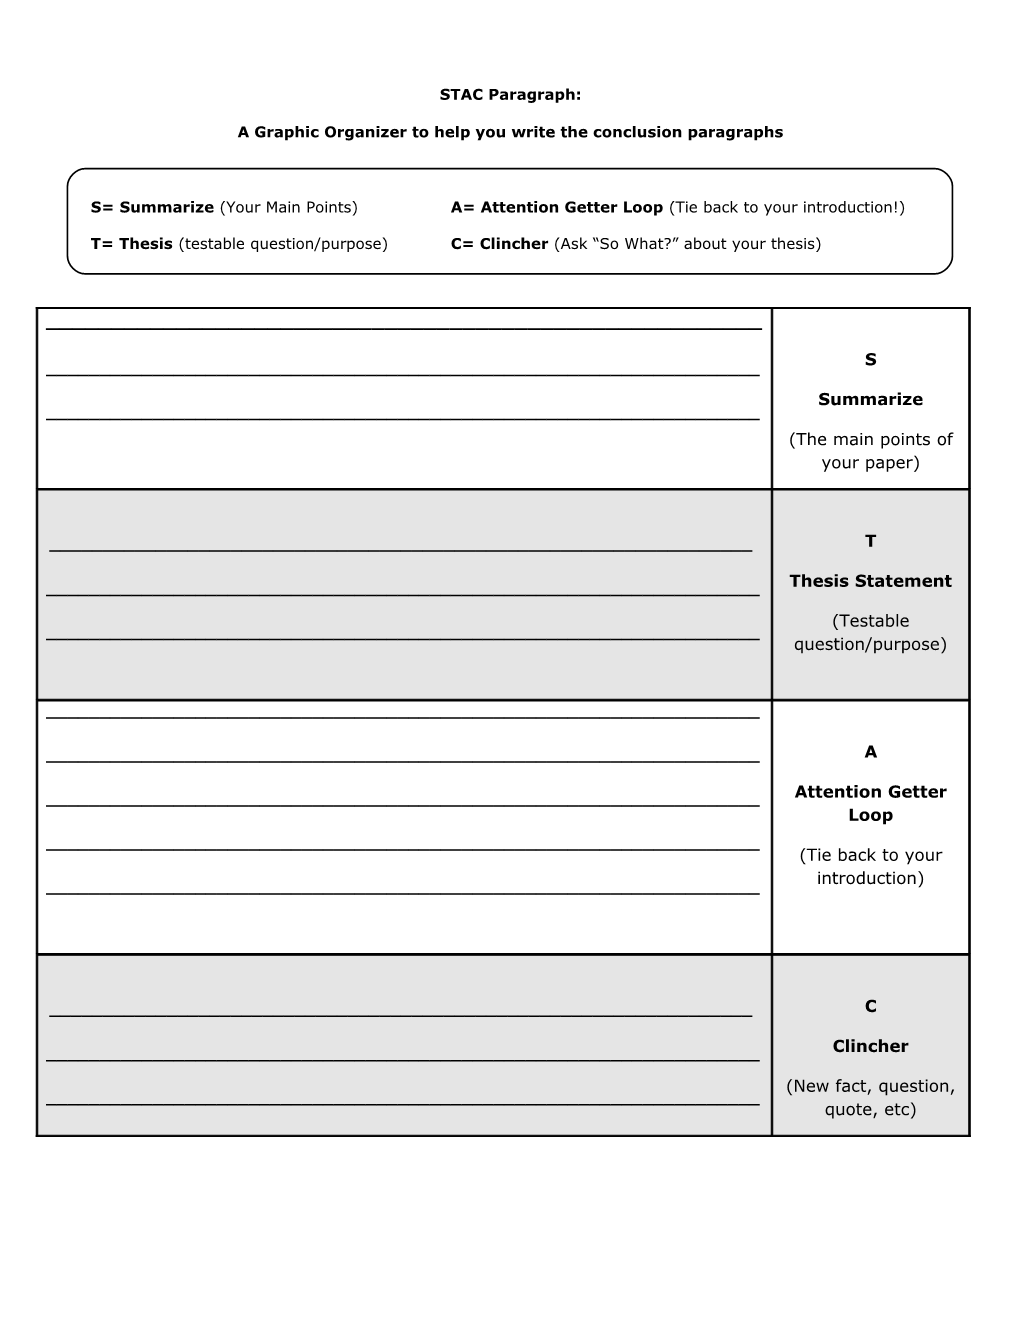 A Graphic Organizer to Help You Write the Conclusion Paragraphs